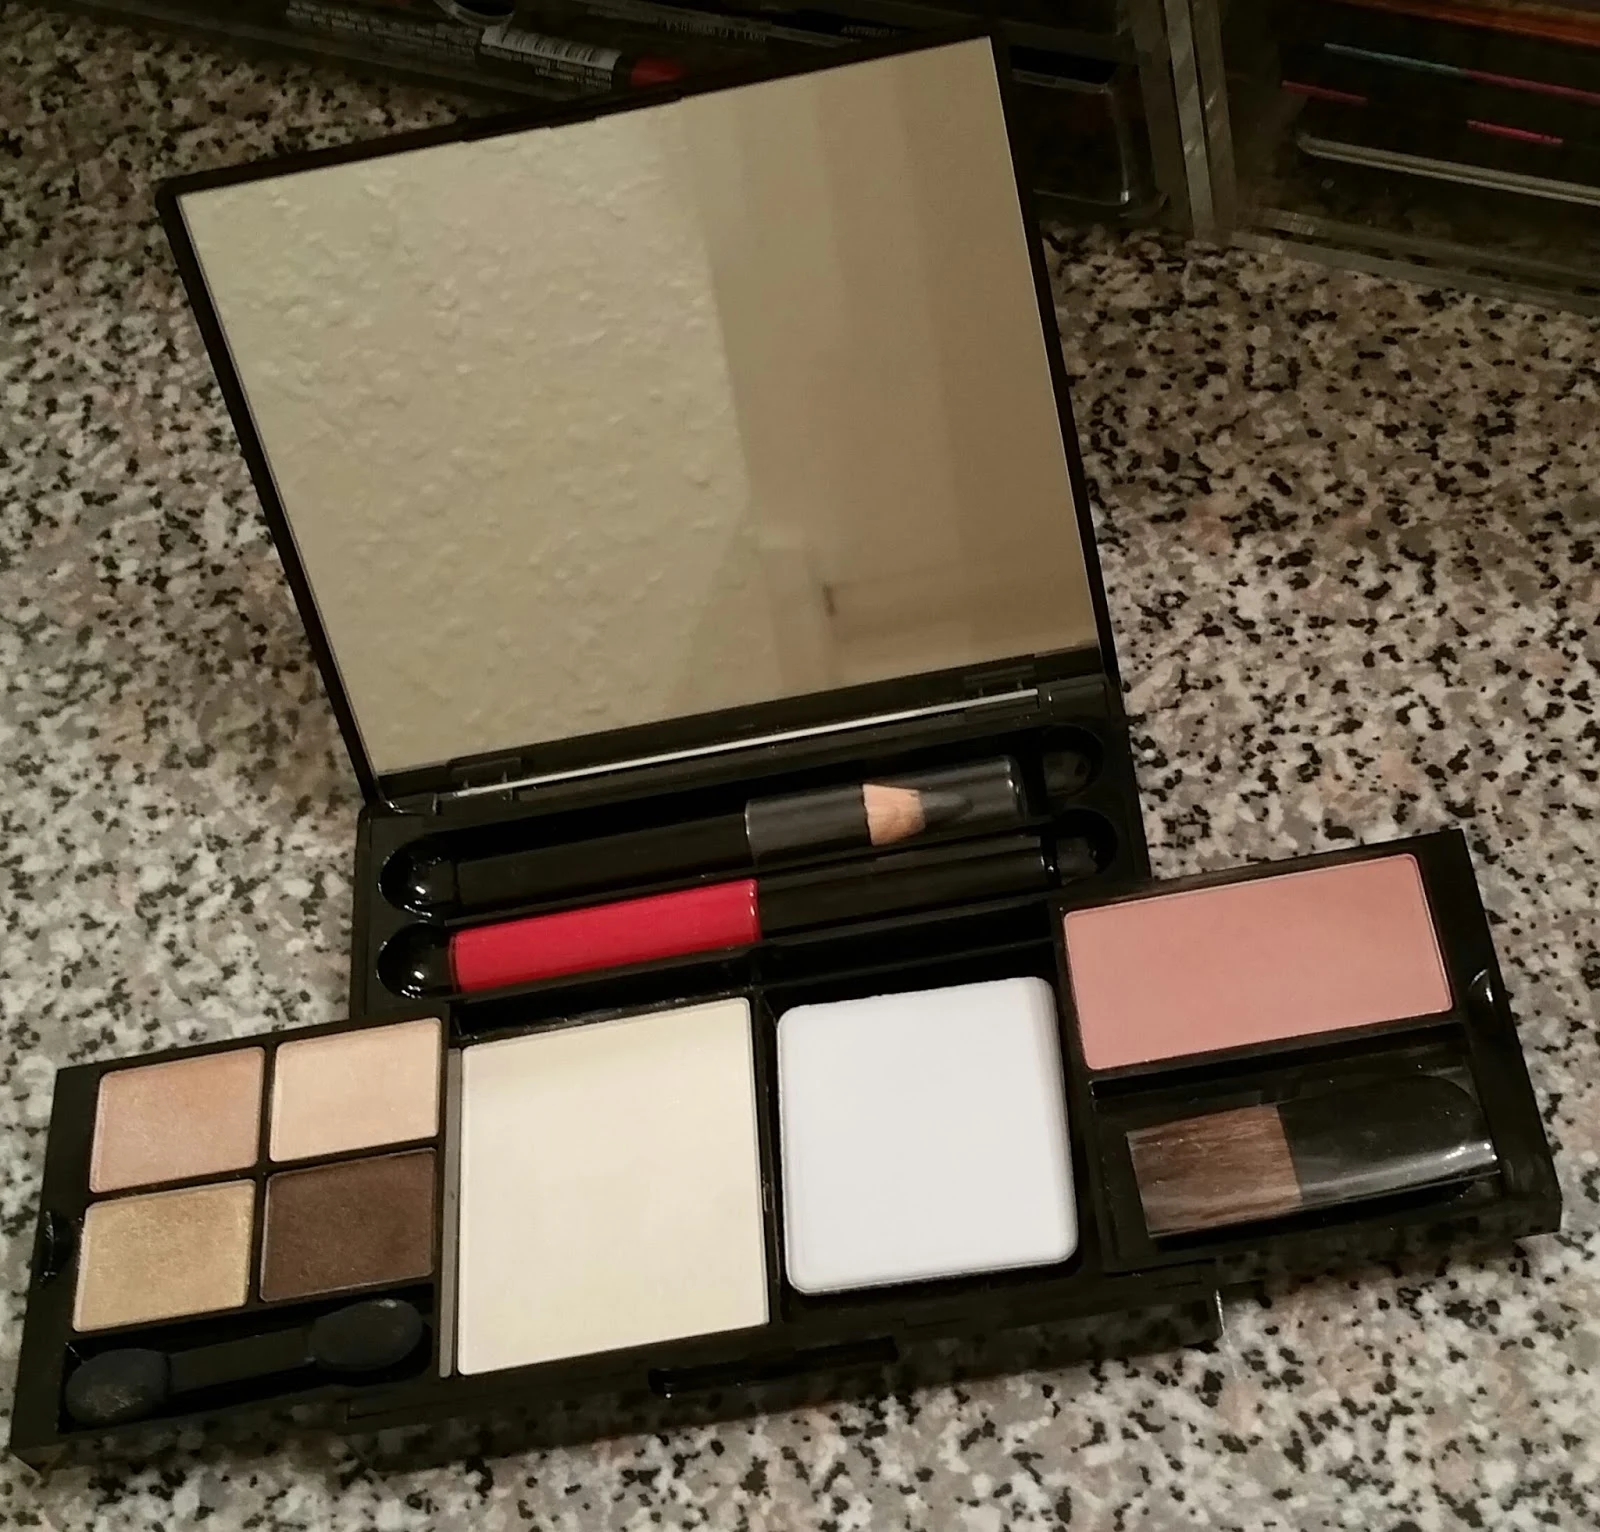 Beauty And More By Pilar Maybelline Gilded In Gold Palette Review FOTD